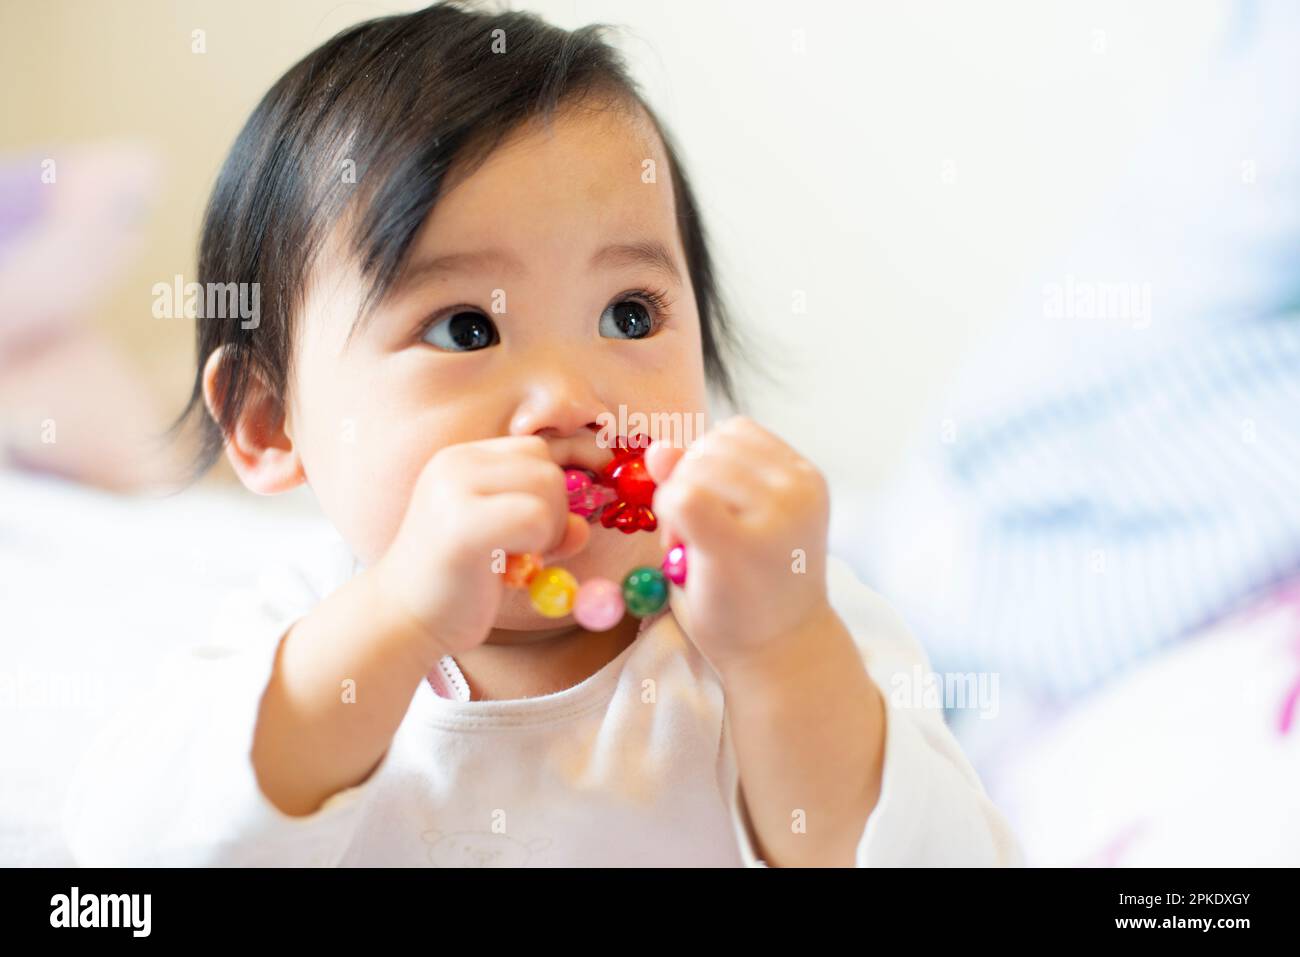 Baby with toy in mouth Stock Photo